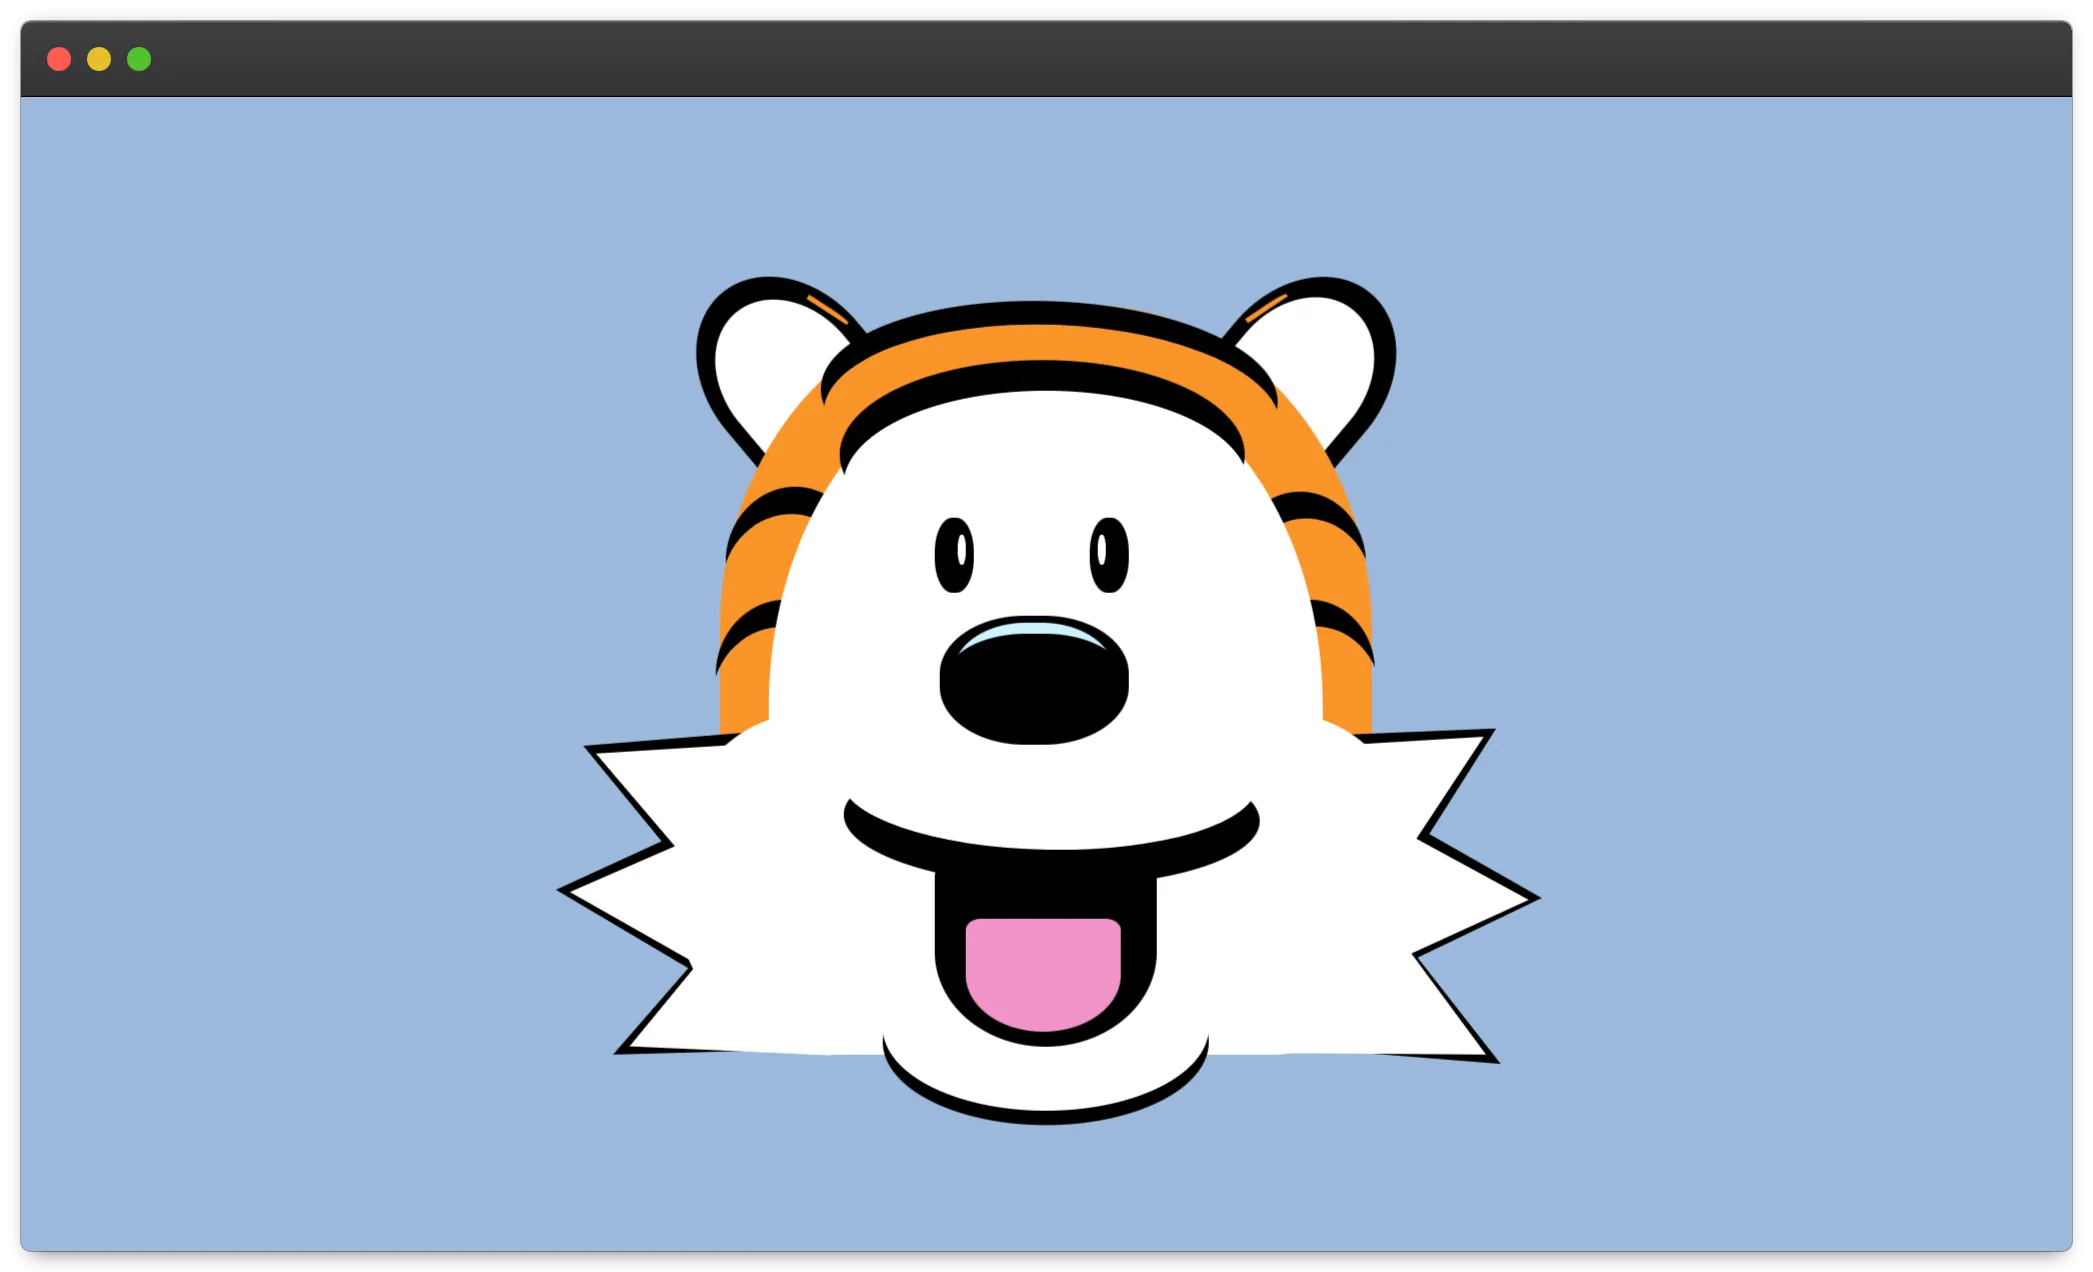 A light blue background with the face of a cartoon tiger centered in the middle. The tiger has round ears, small eyes, and a big smile. His name is Hobbes, from the comic strip Calvin and Hobbes.